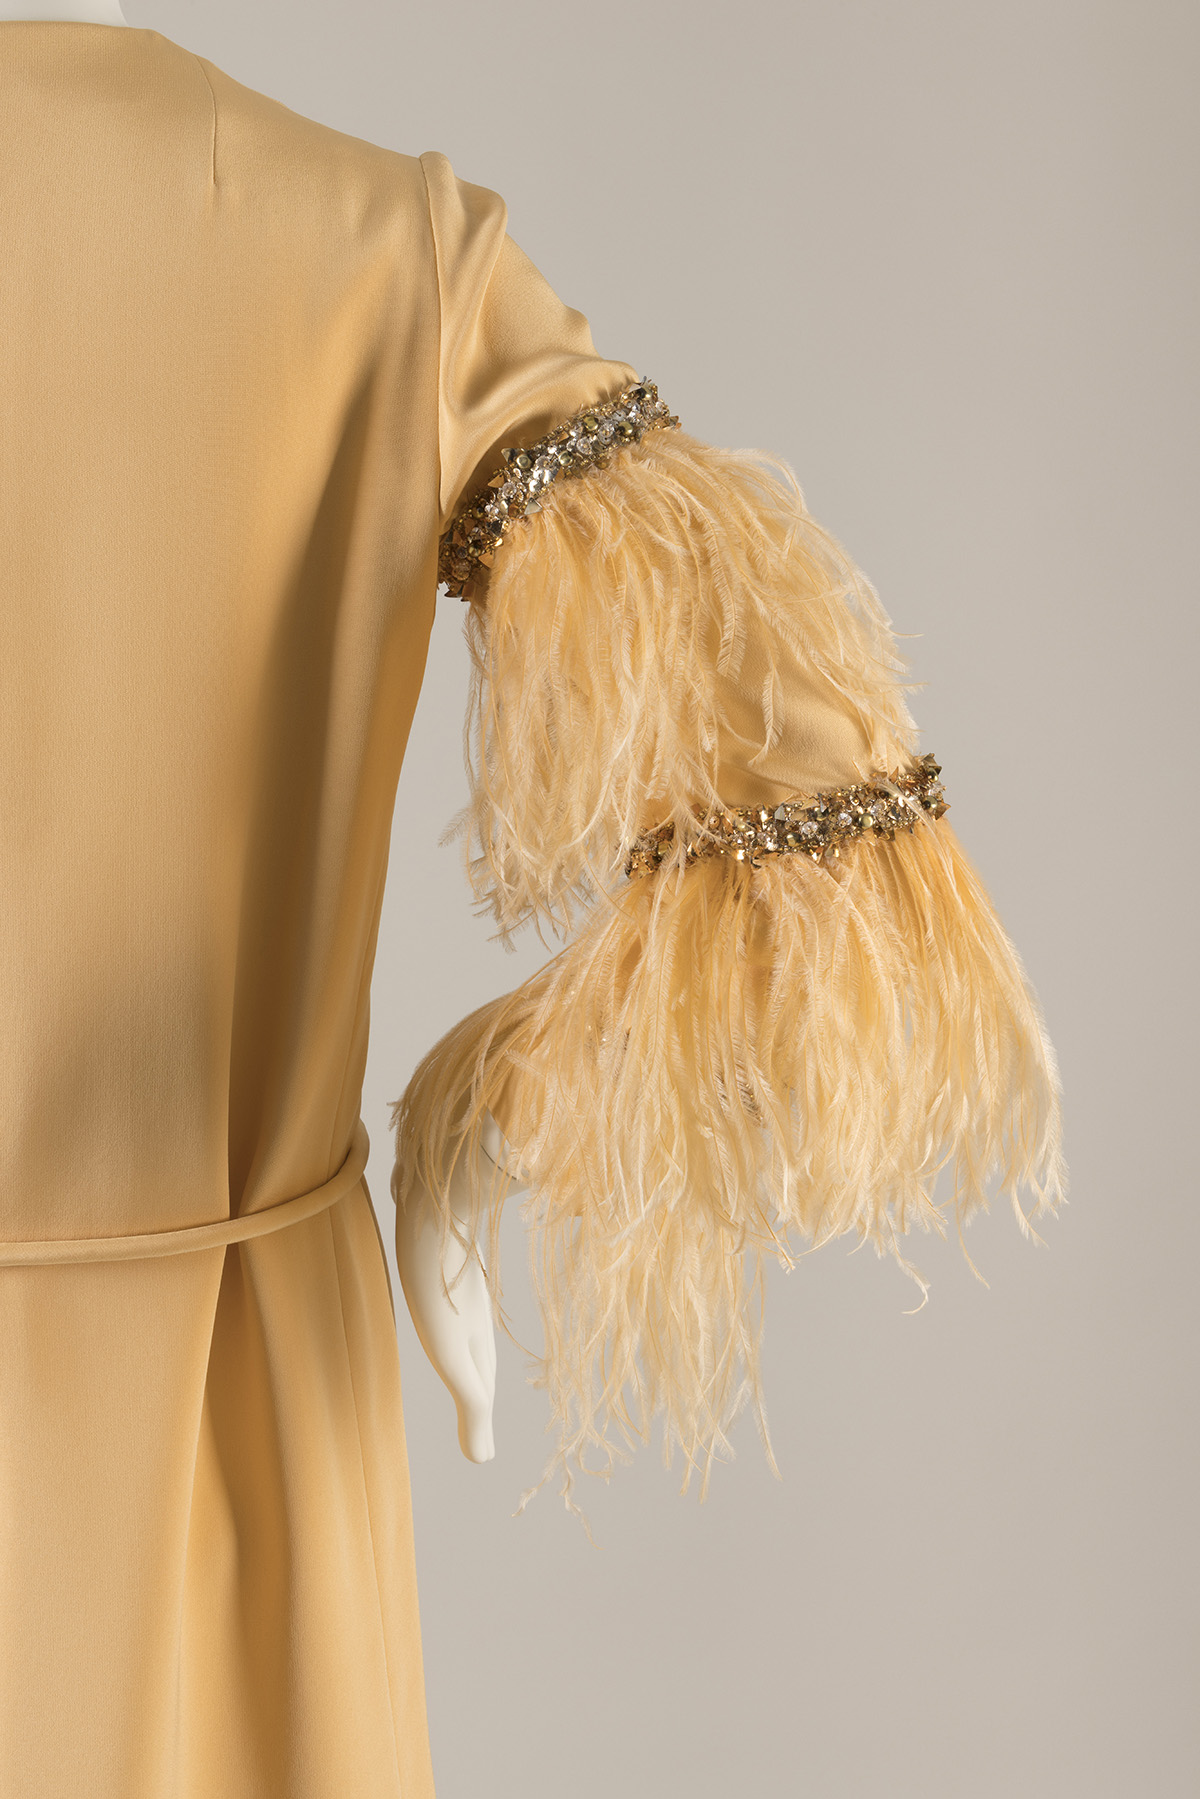 Partial side view of a silk dress sleeve trimmed with feathers and horizontal bands of rhinestones and beads at mid-arm.